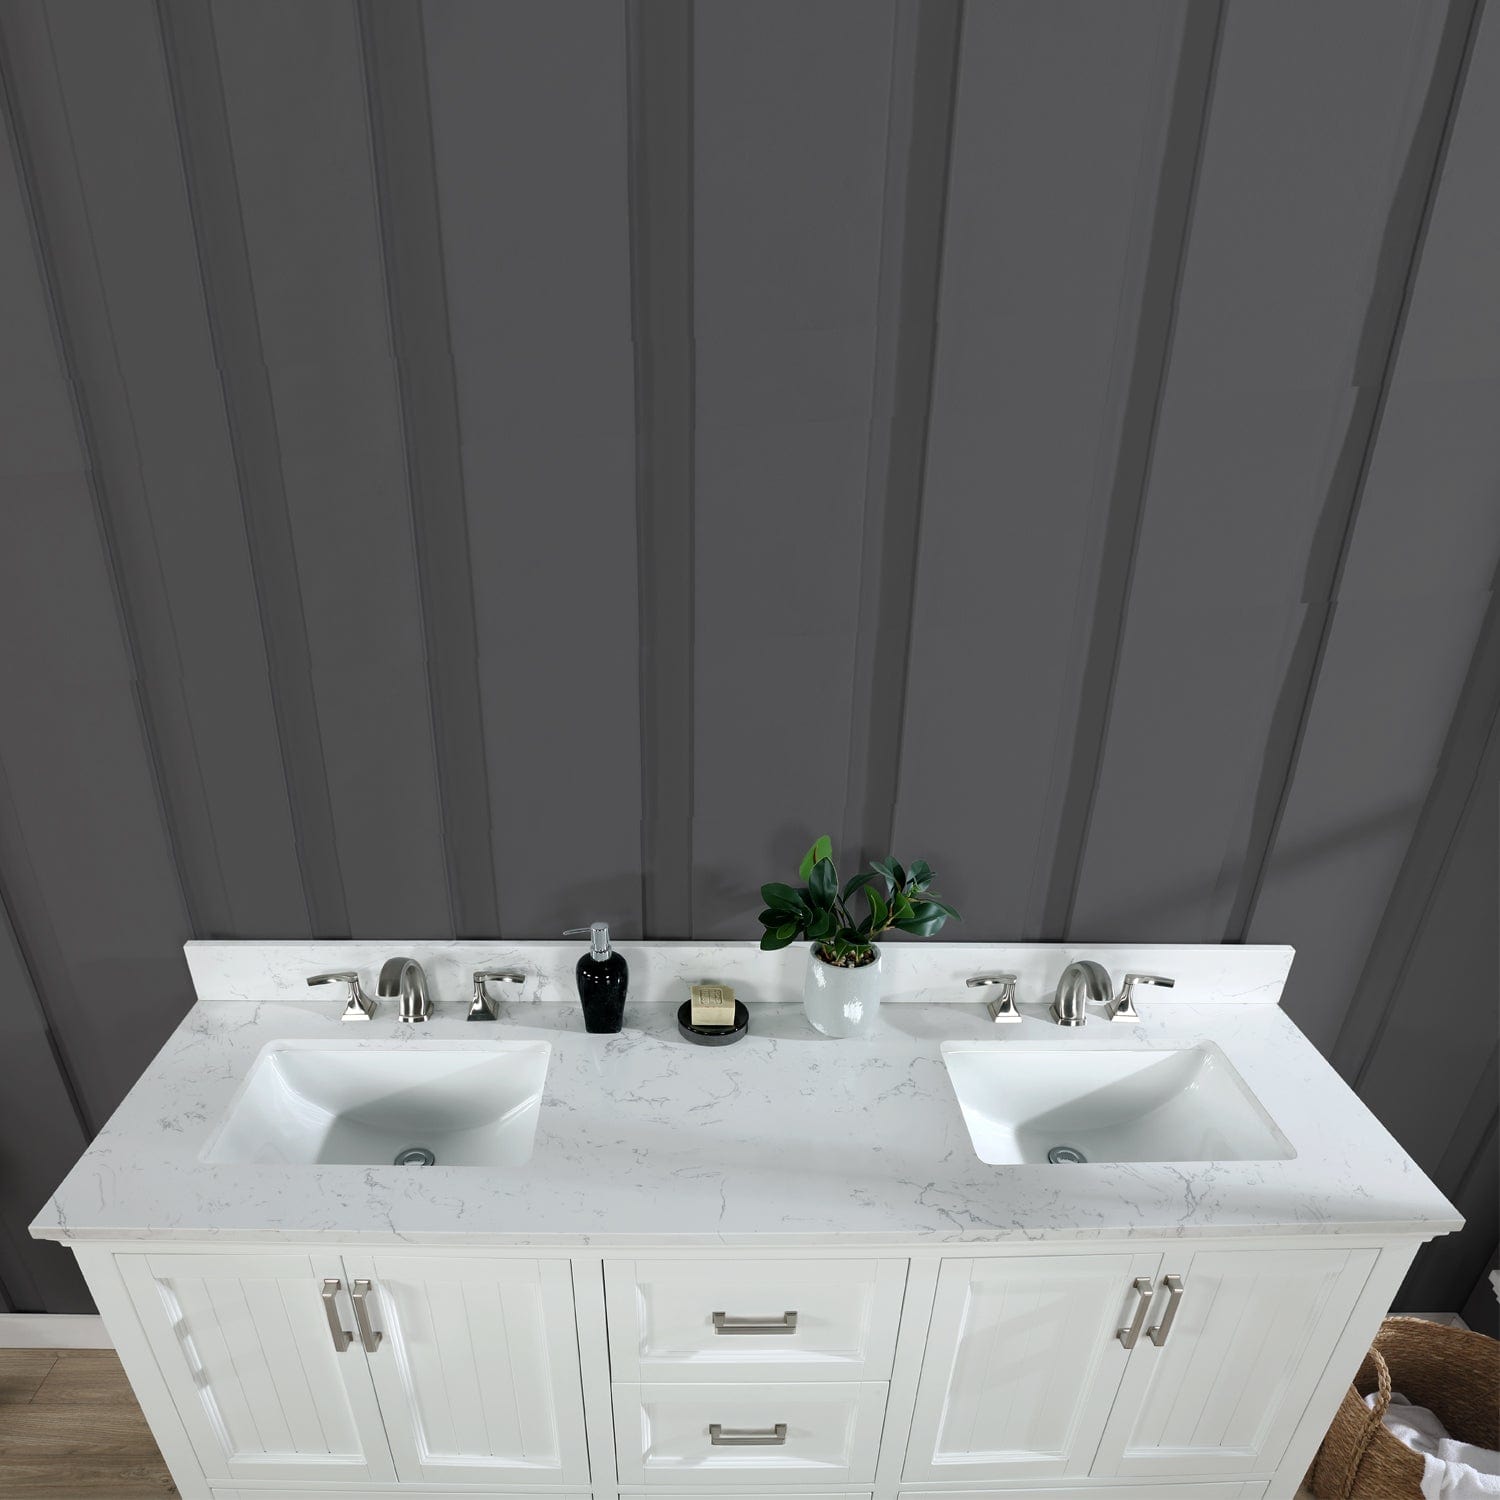 Altair Isla 72" Double Bathroom Vanity Set in White and Carrara White Marble Countertop with Mirror 538072-WH-AW - Molaix696952511376Vanity538072-WH-AW